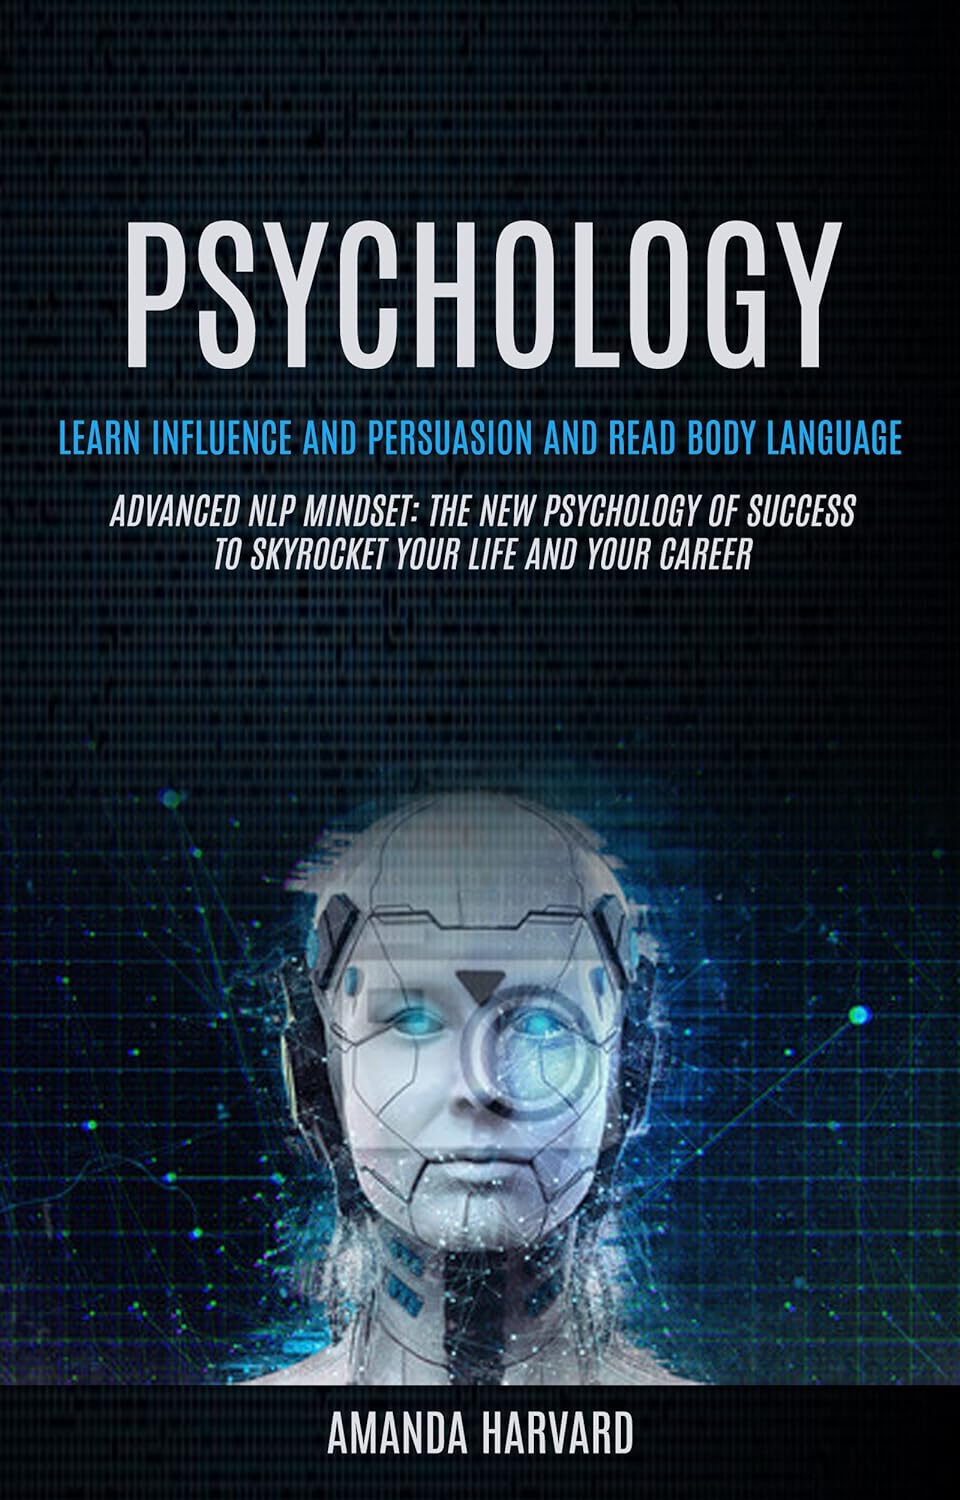 Psychology: Learn Influence And Persuasion And Read Body Language (Advanced Nlp Mindset: The New Psychology Of Success To Skyrocket Your Life And Your Career)